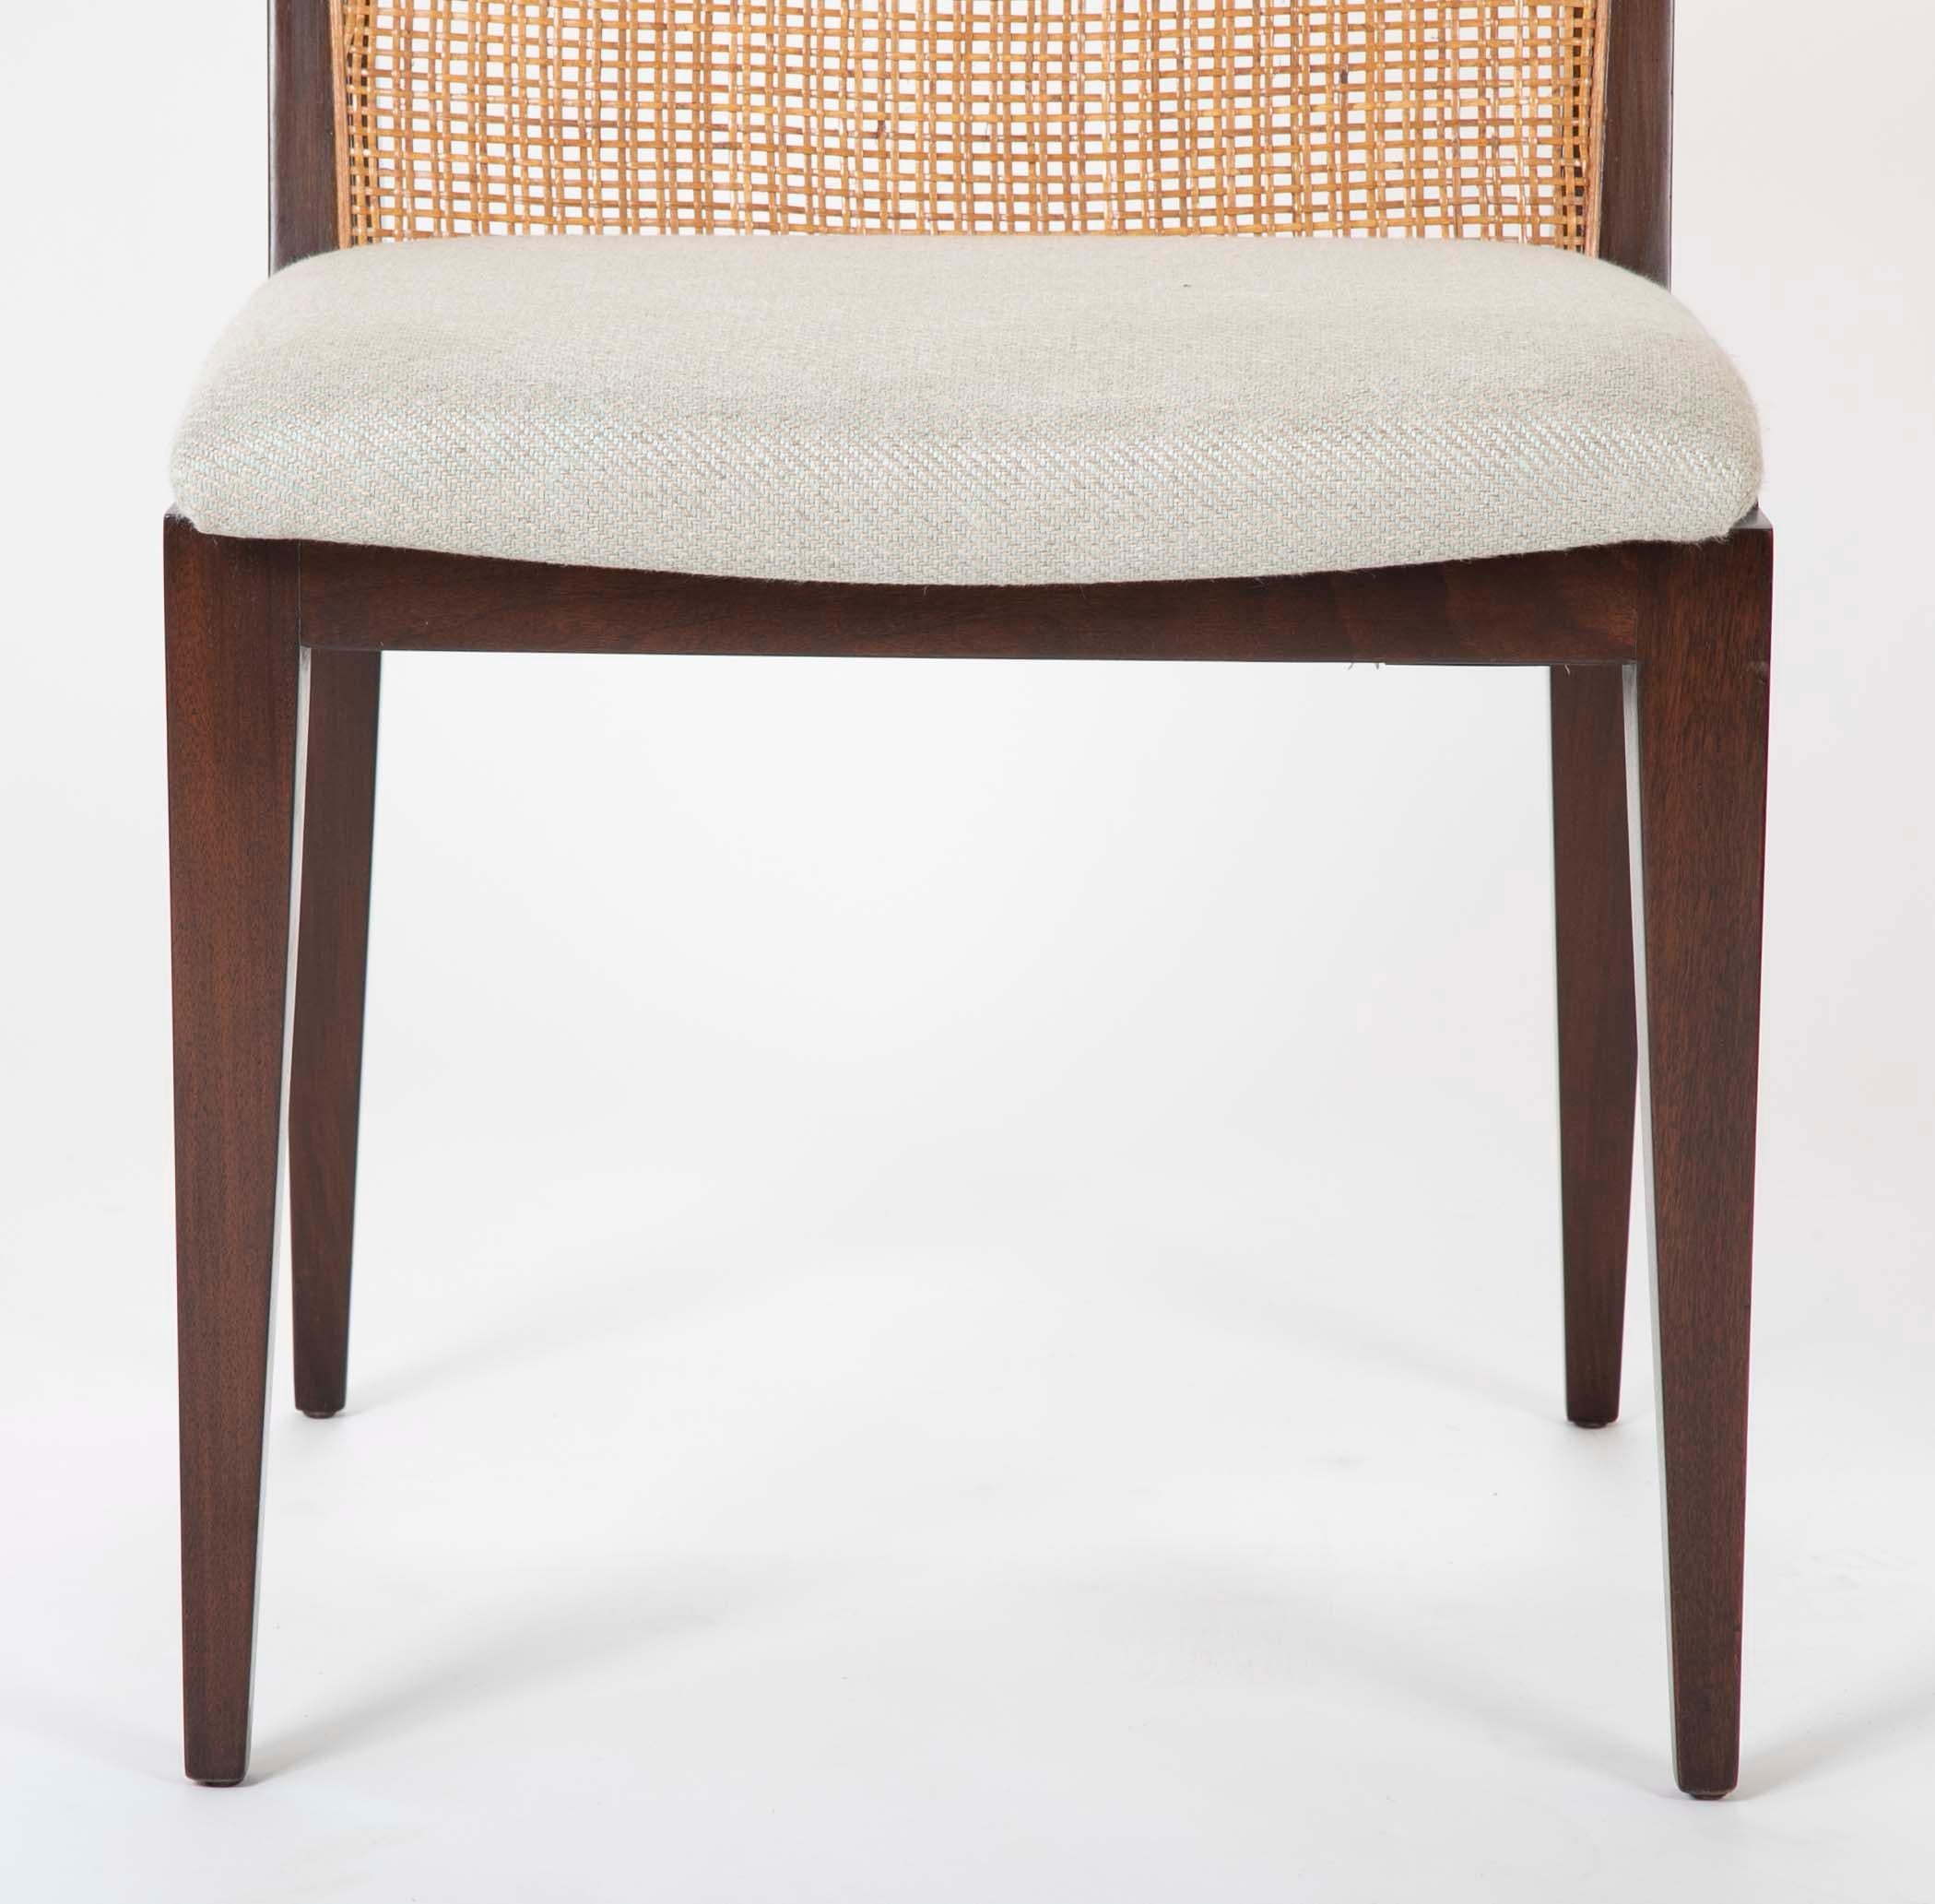 American A Set of Six Walnut and Caned Dining Chair designed by Edward Wormley